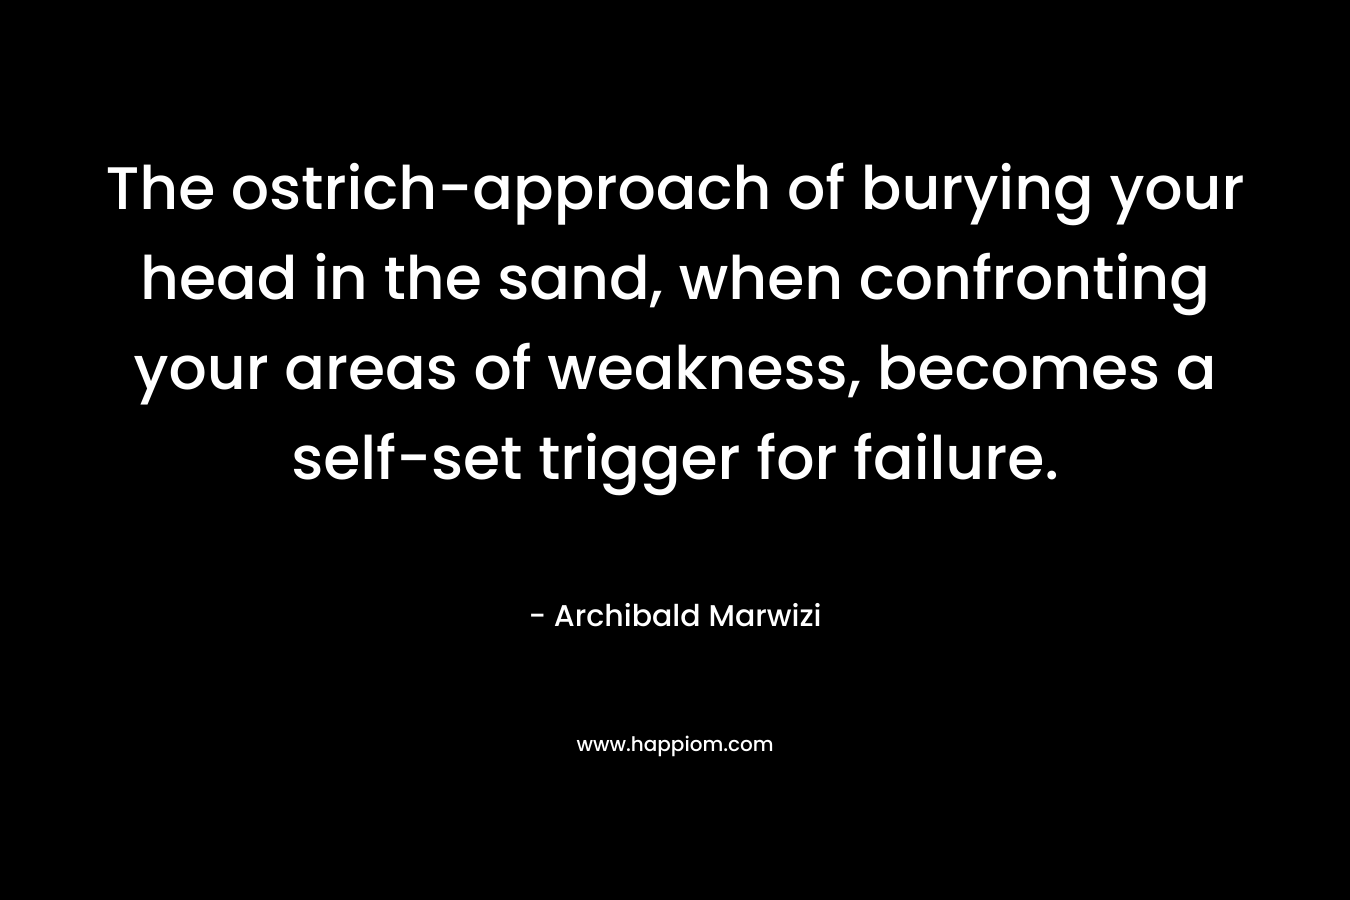 The ostrich-approach of burying your head in the sand, when confronting your areas of weakness, becomes a self-set trigger for failure. – Archibald Marwizi